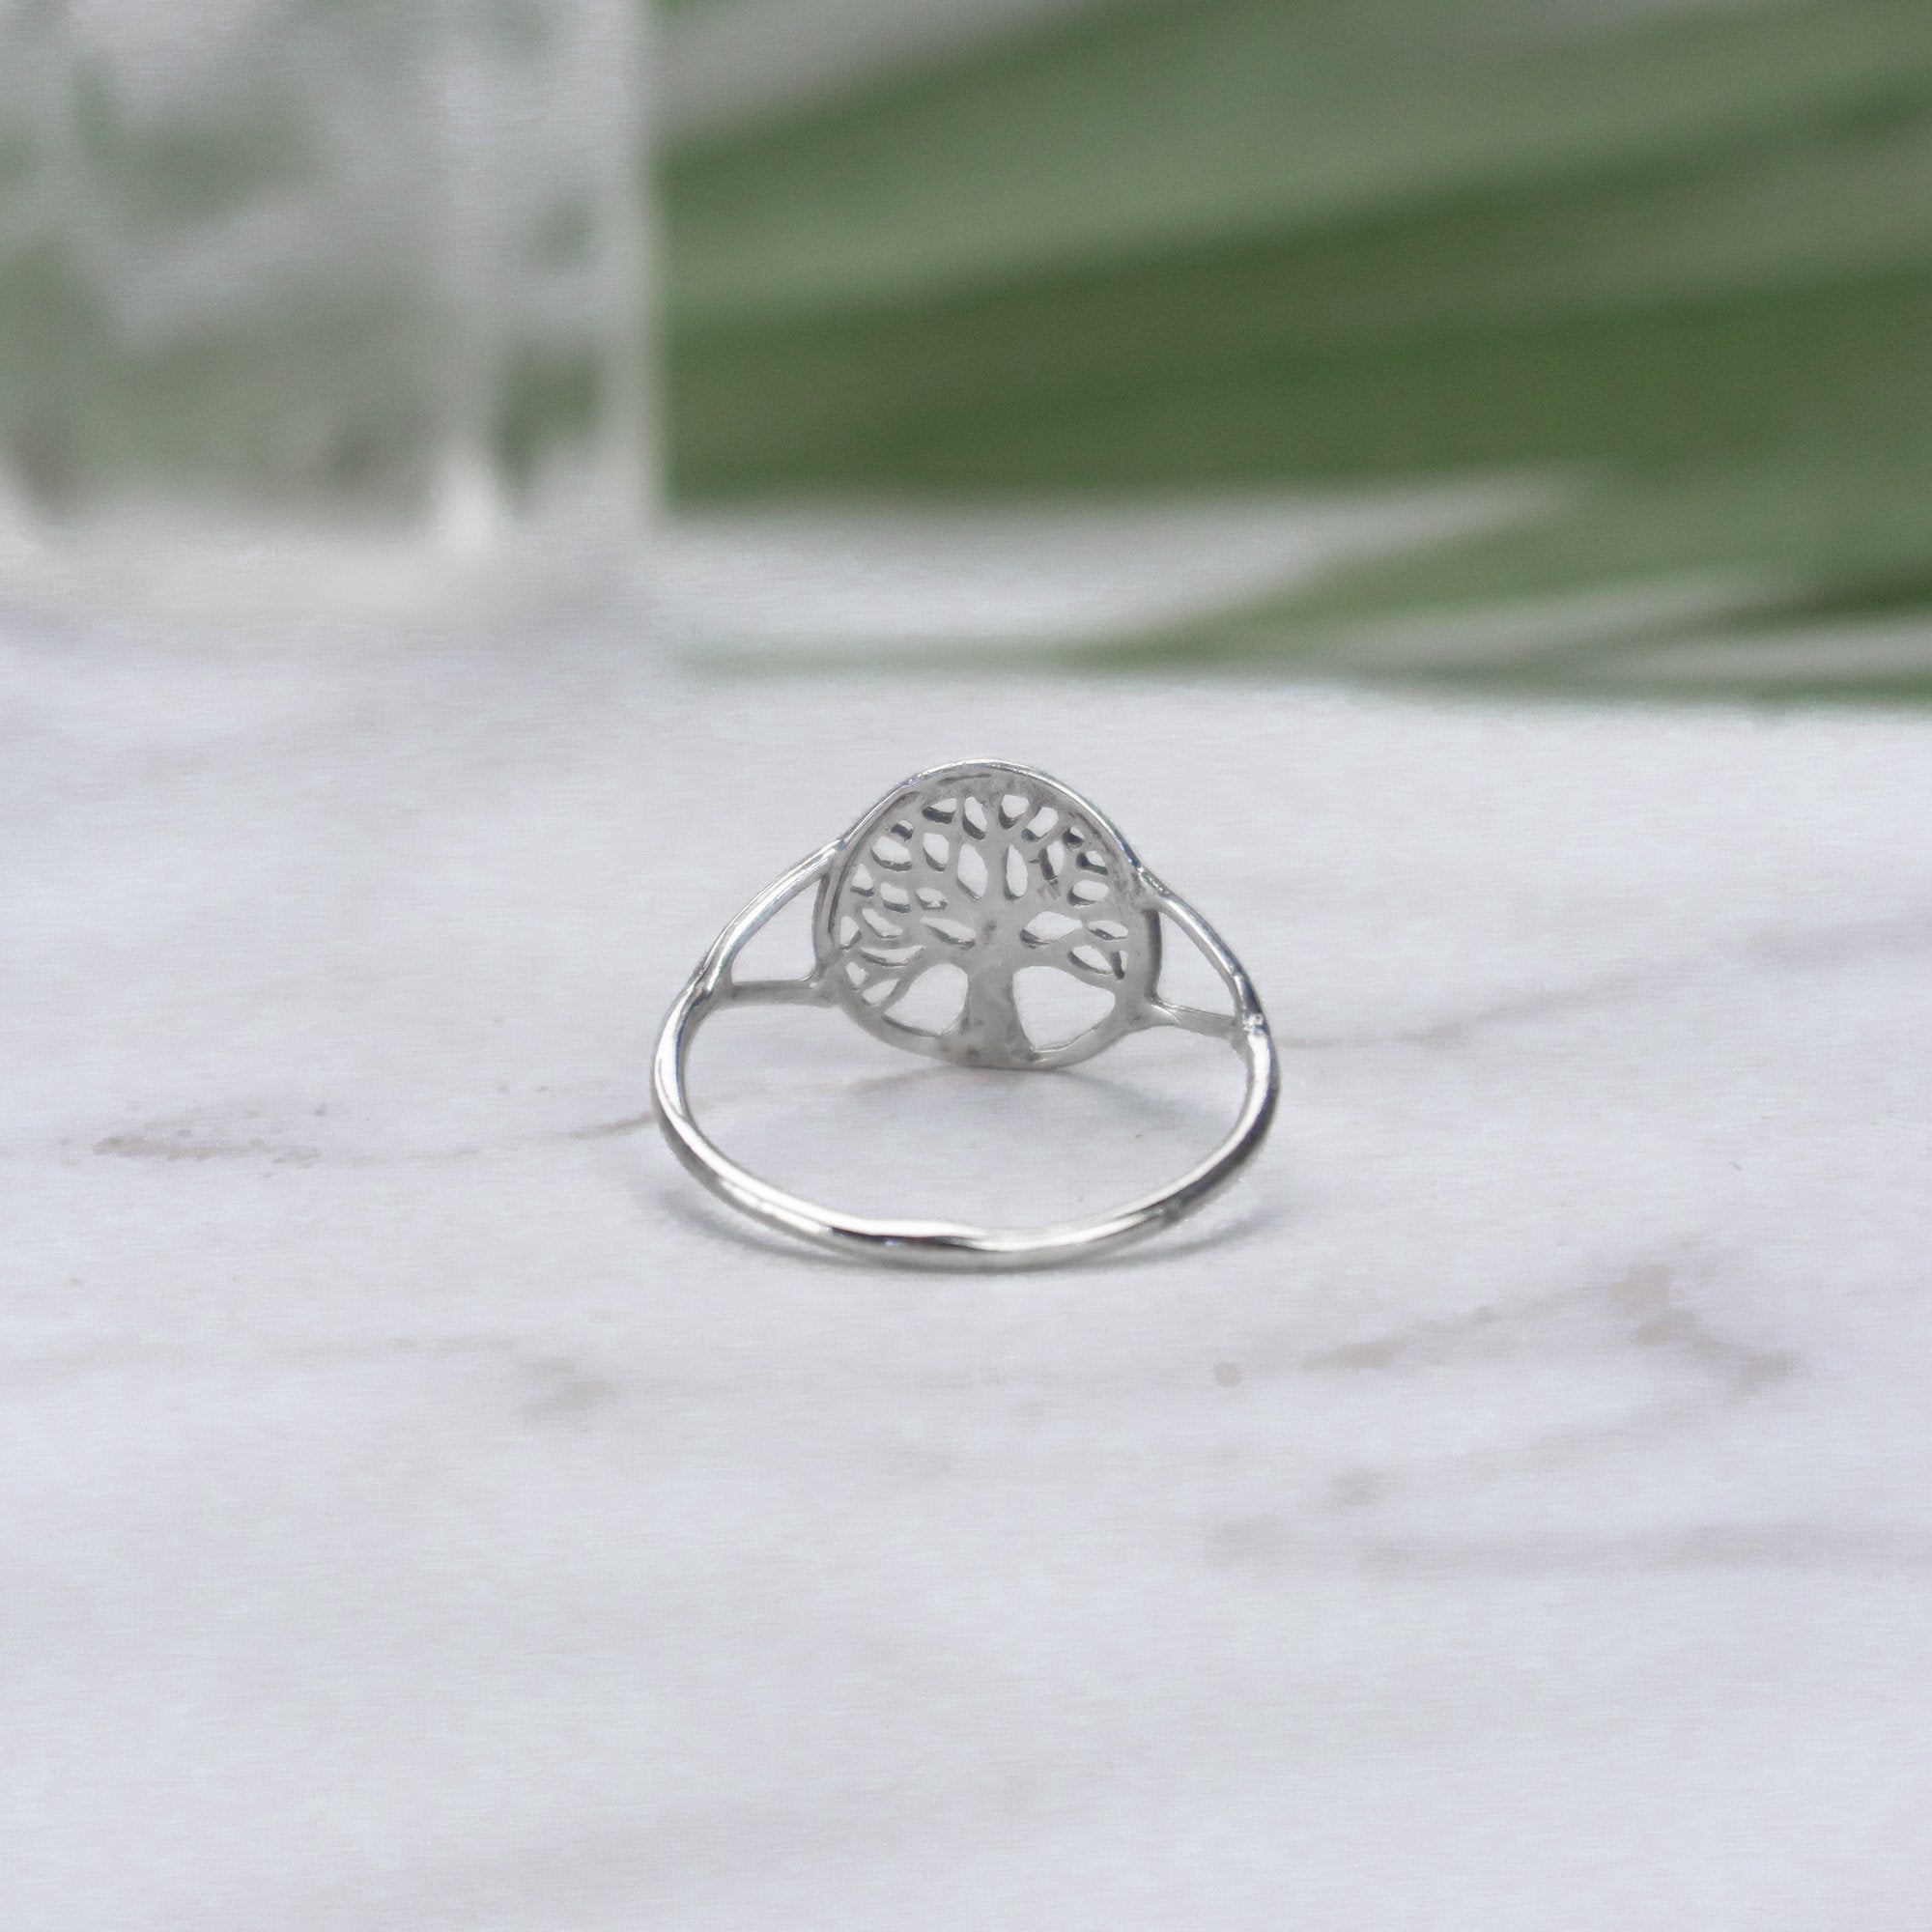 Tree Of Life Ring, Engraved Tree Ring in Sterling Silver, Bridesmaid Gift,  Lace Ring, Stackable Ring, Midi Ring, Filigree Ring, Popular Ring